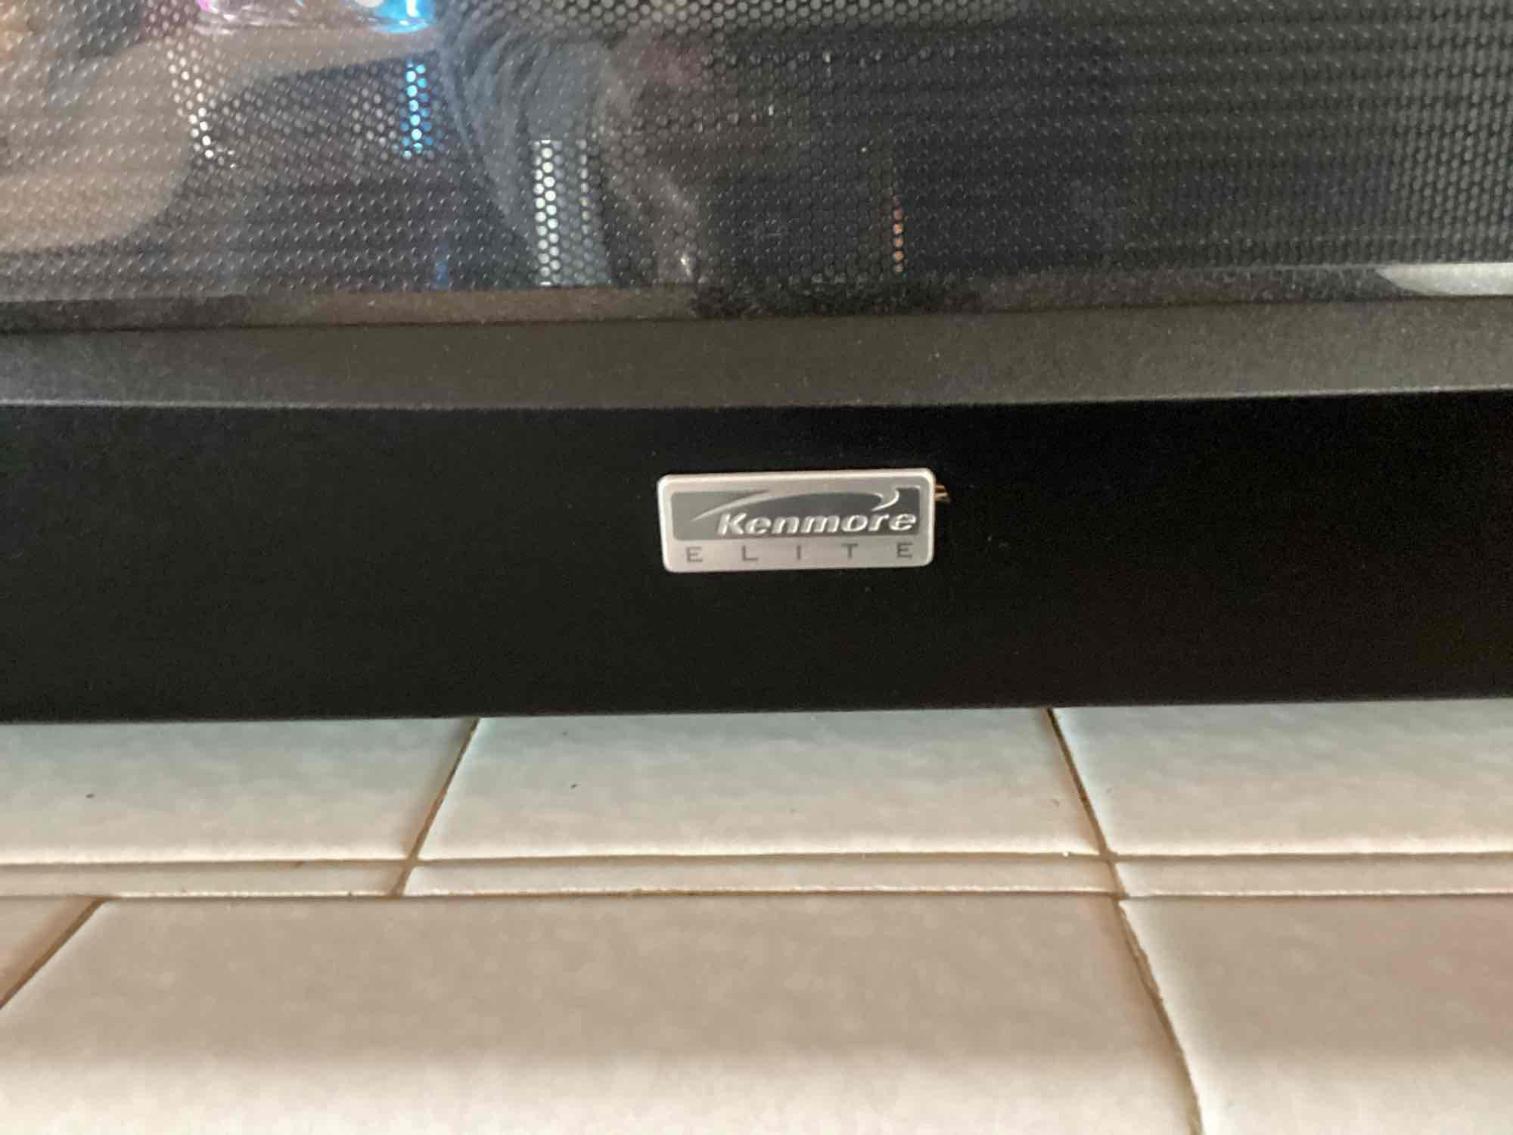 Image for Microwave and Toaster Oven